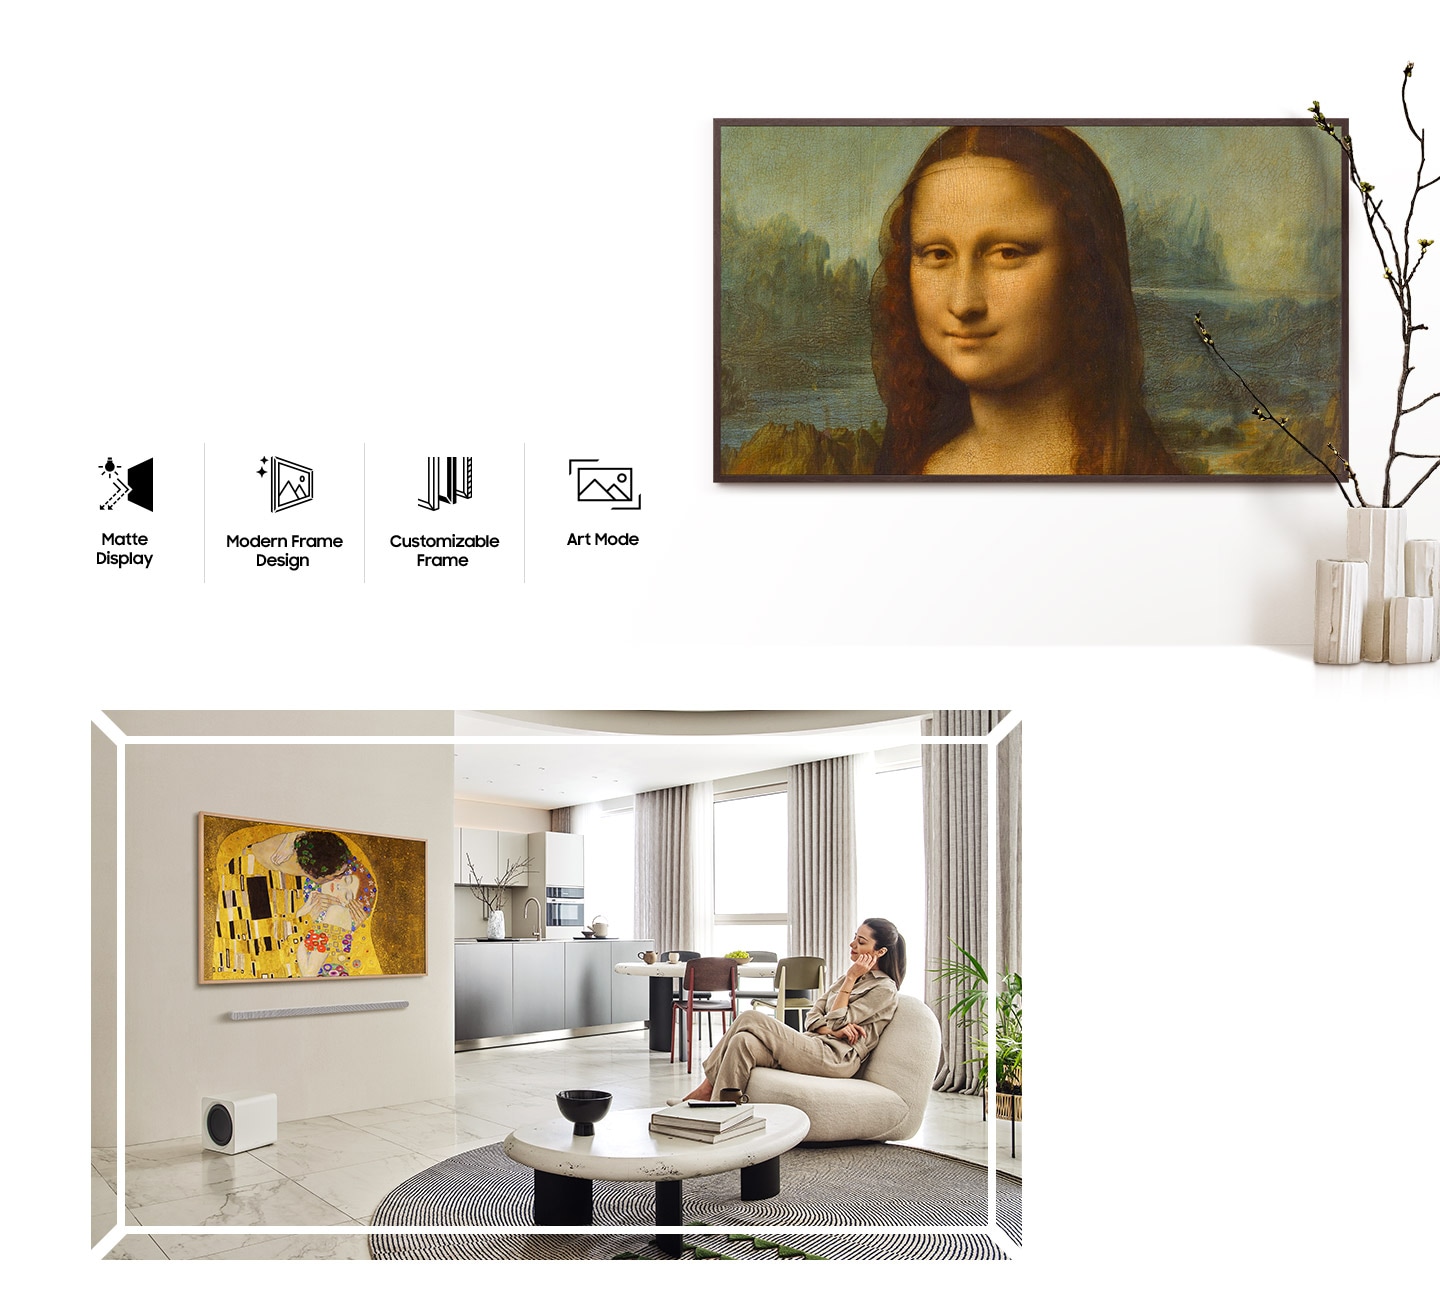 The Frame is displaying a famous artwork on its screen. The Frame's Top 4 Features including Matte Display, Modern Frame Design, Customizable Frame, Art Mode are on display. A woman is sitting on a sofa enjoying a famous artwork displayed on The Frame.